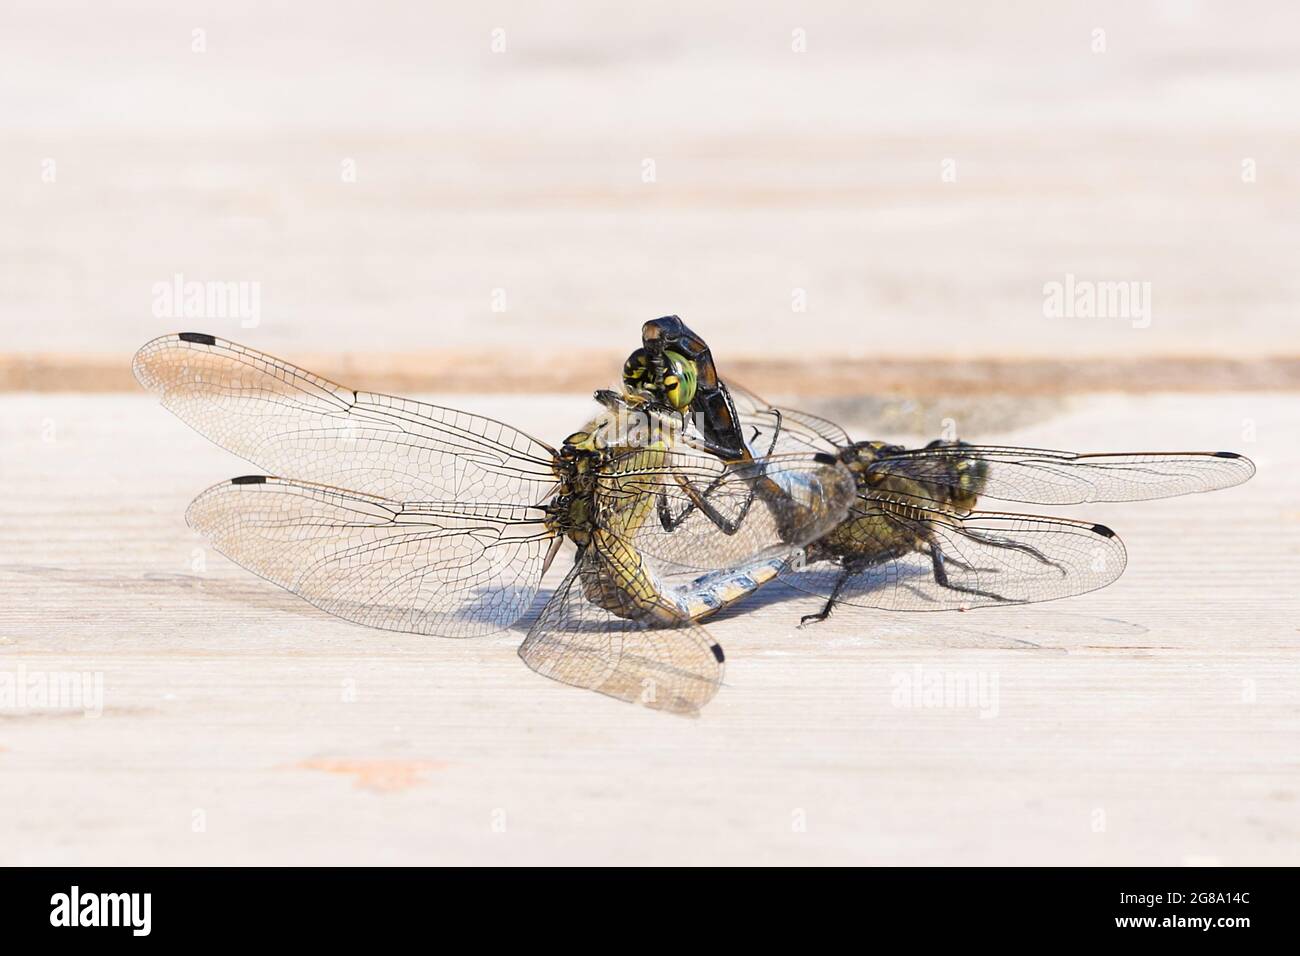 Black-tailed skimmer dragonflies mate on a Jetty. Kellersee, Germany. Stock Photo